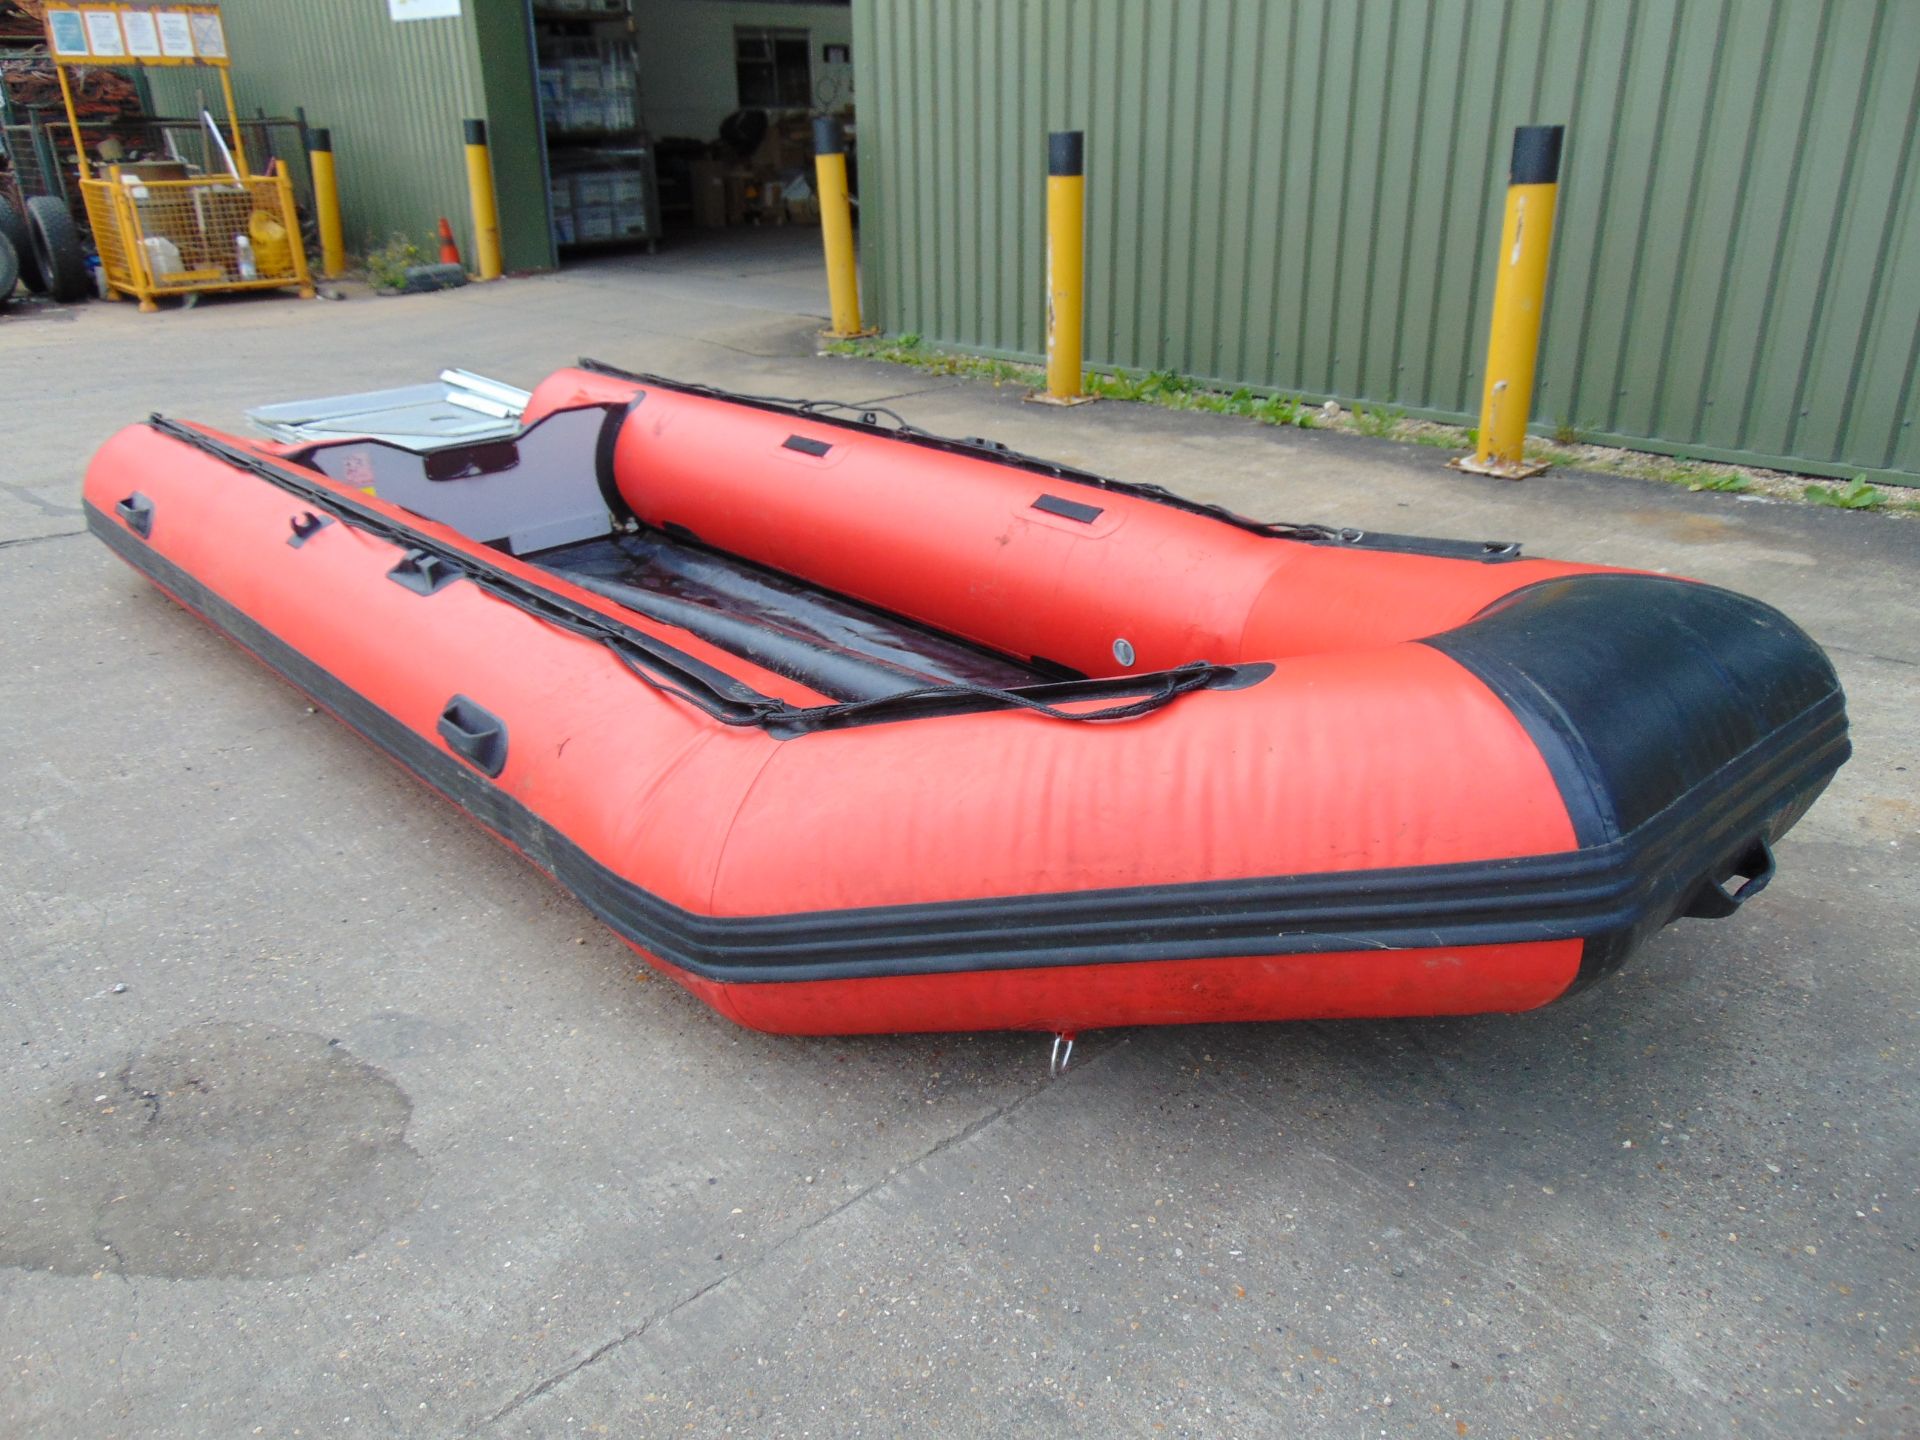 Sinoboat Inflatable Flood Rescue Boat - Image 3 of 14